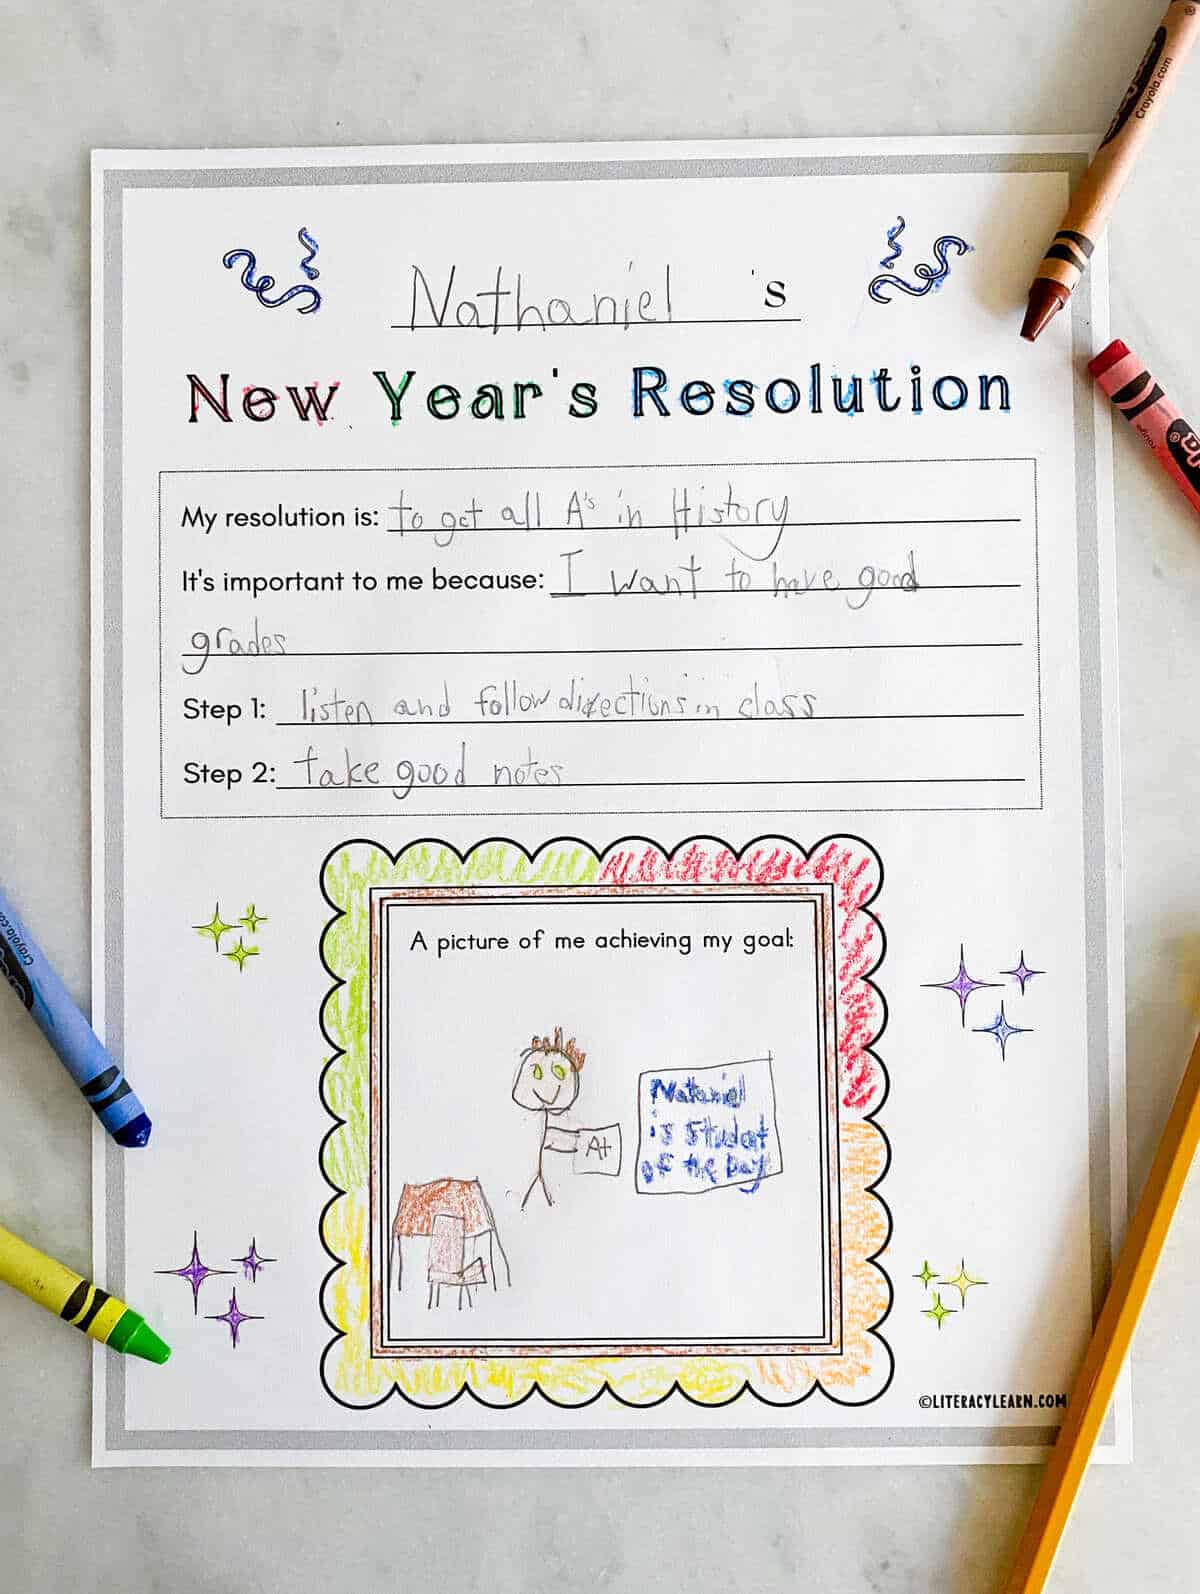 A printed and finished new years resolution worksheet with crayons.